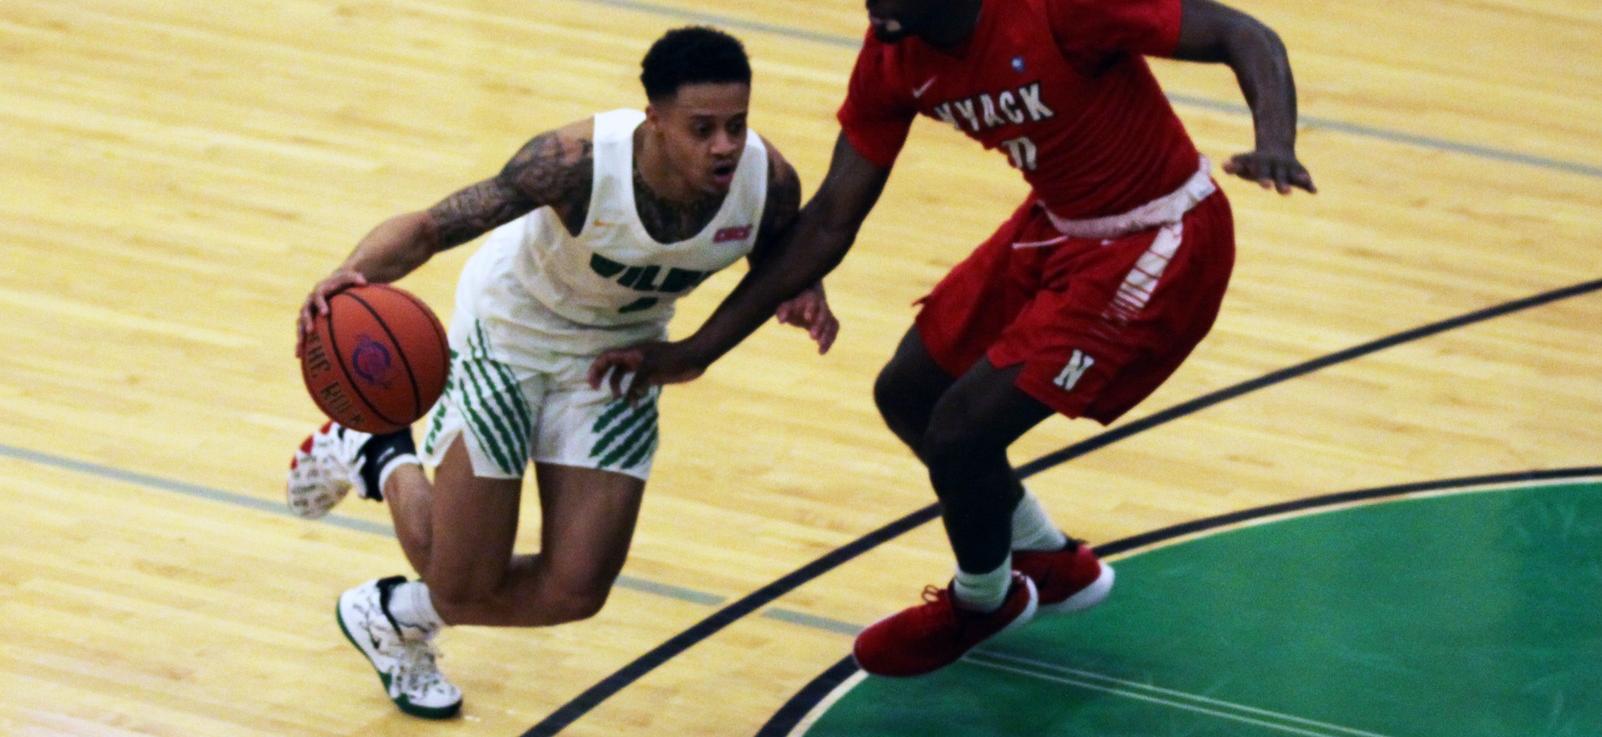 Copyright 2019; Wilmington University. All rights reserved. File photo of Jermaine Head who scored 27 points at USciences. Photo by Dan Lauletta. January 5, 2019 vs. Nyack.